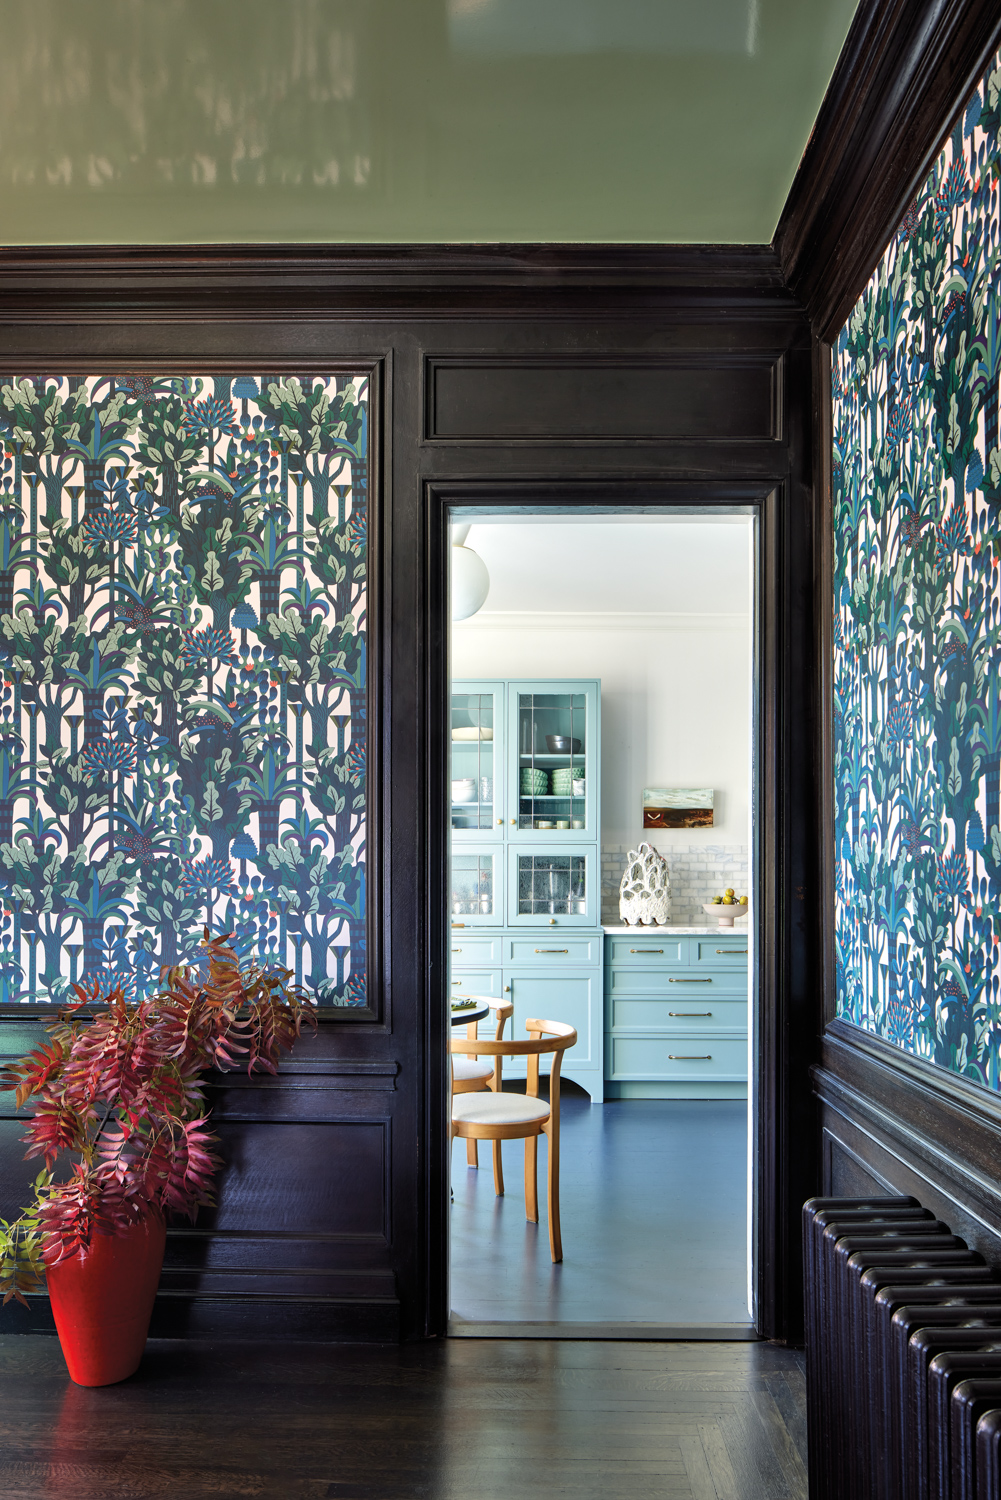 Dining room with catcus wallcovering...